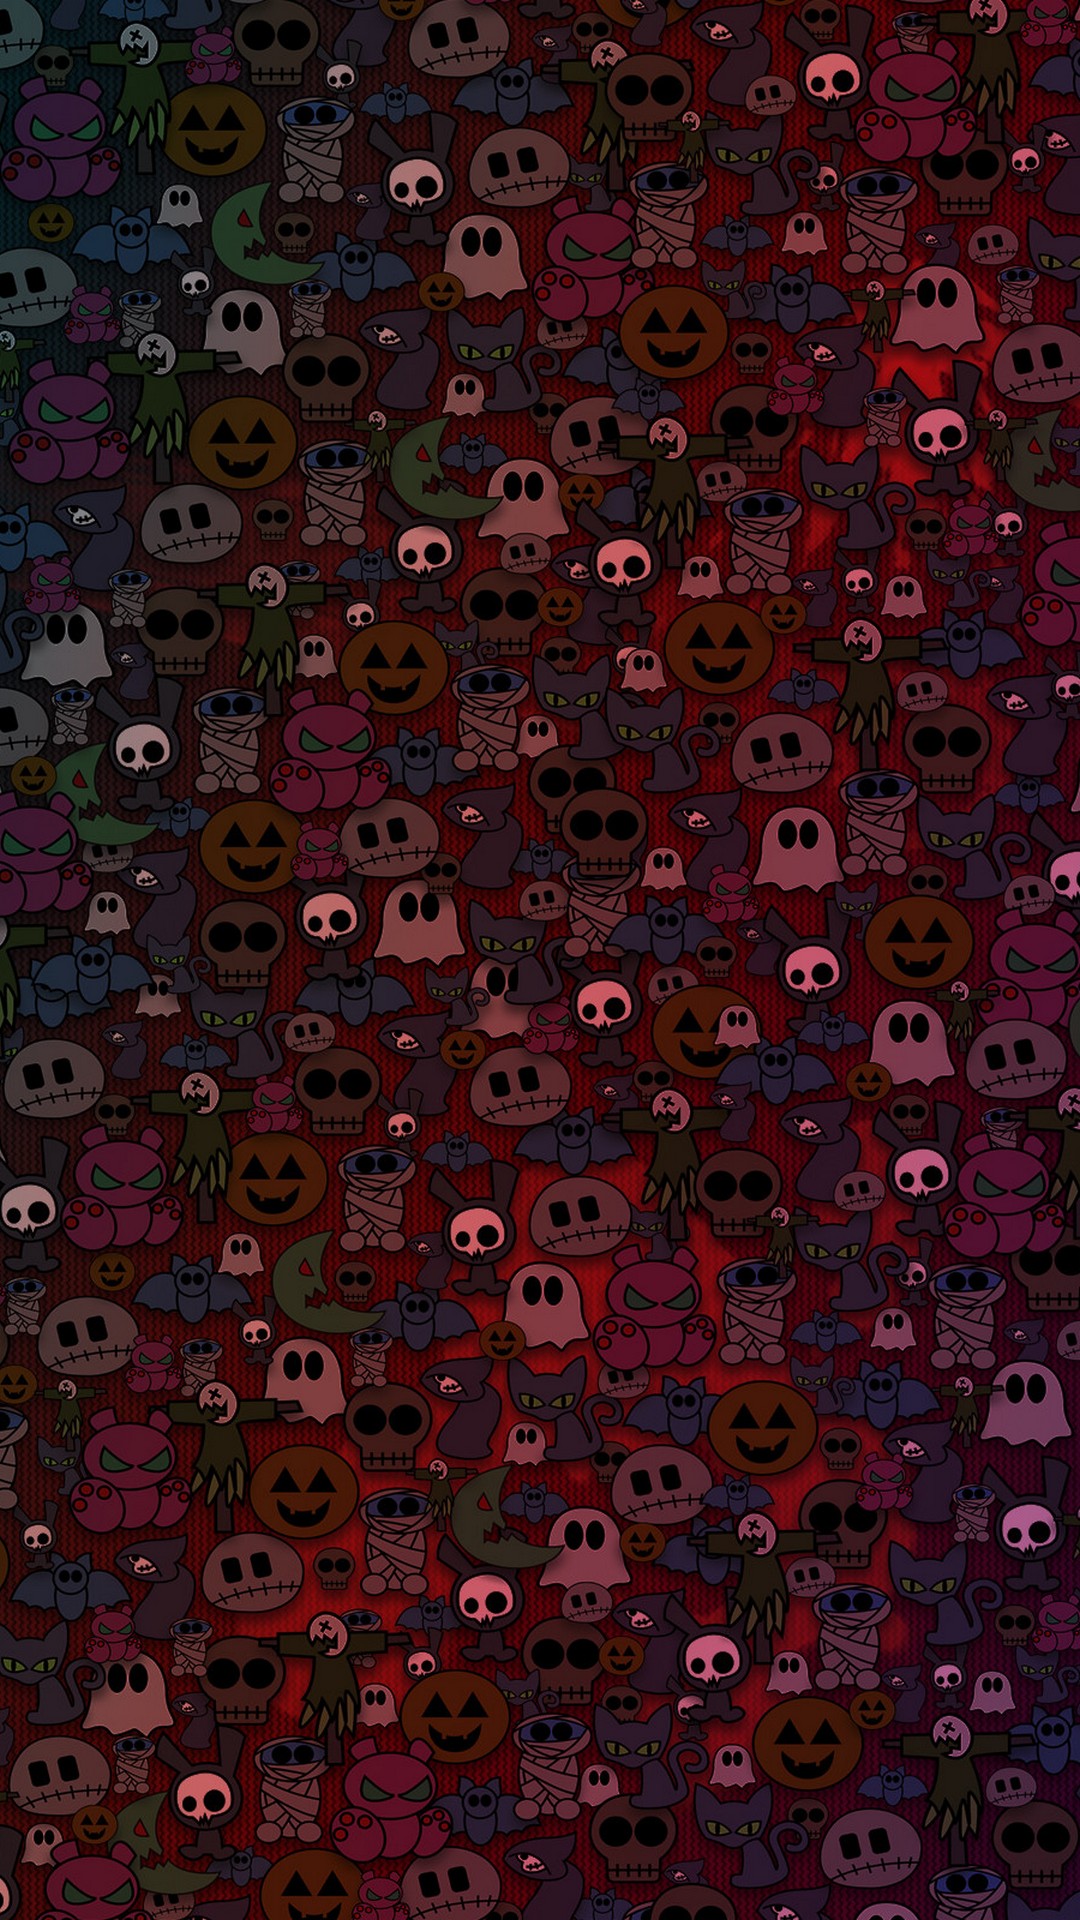 Halloween Aesthetic Wallpaper For Mobile with high-resolution 1080x1920 pixel. You can use and set as wallpaper for Notebook Screensavers, Mac Wallpapers, Mobile Home Screen, iPhone or Android Phones Lock Screen